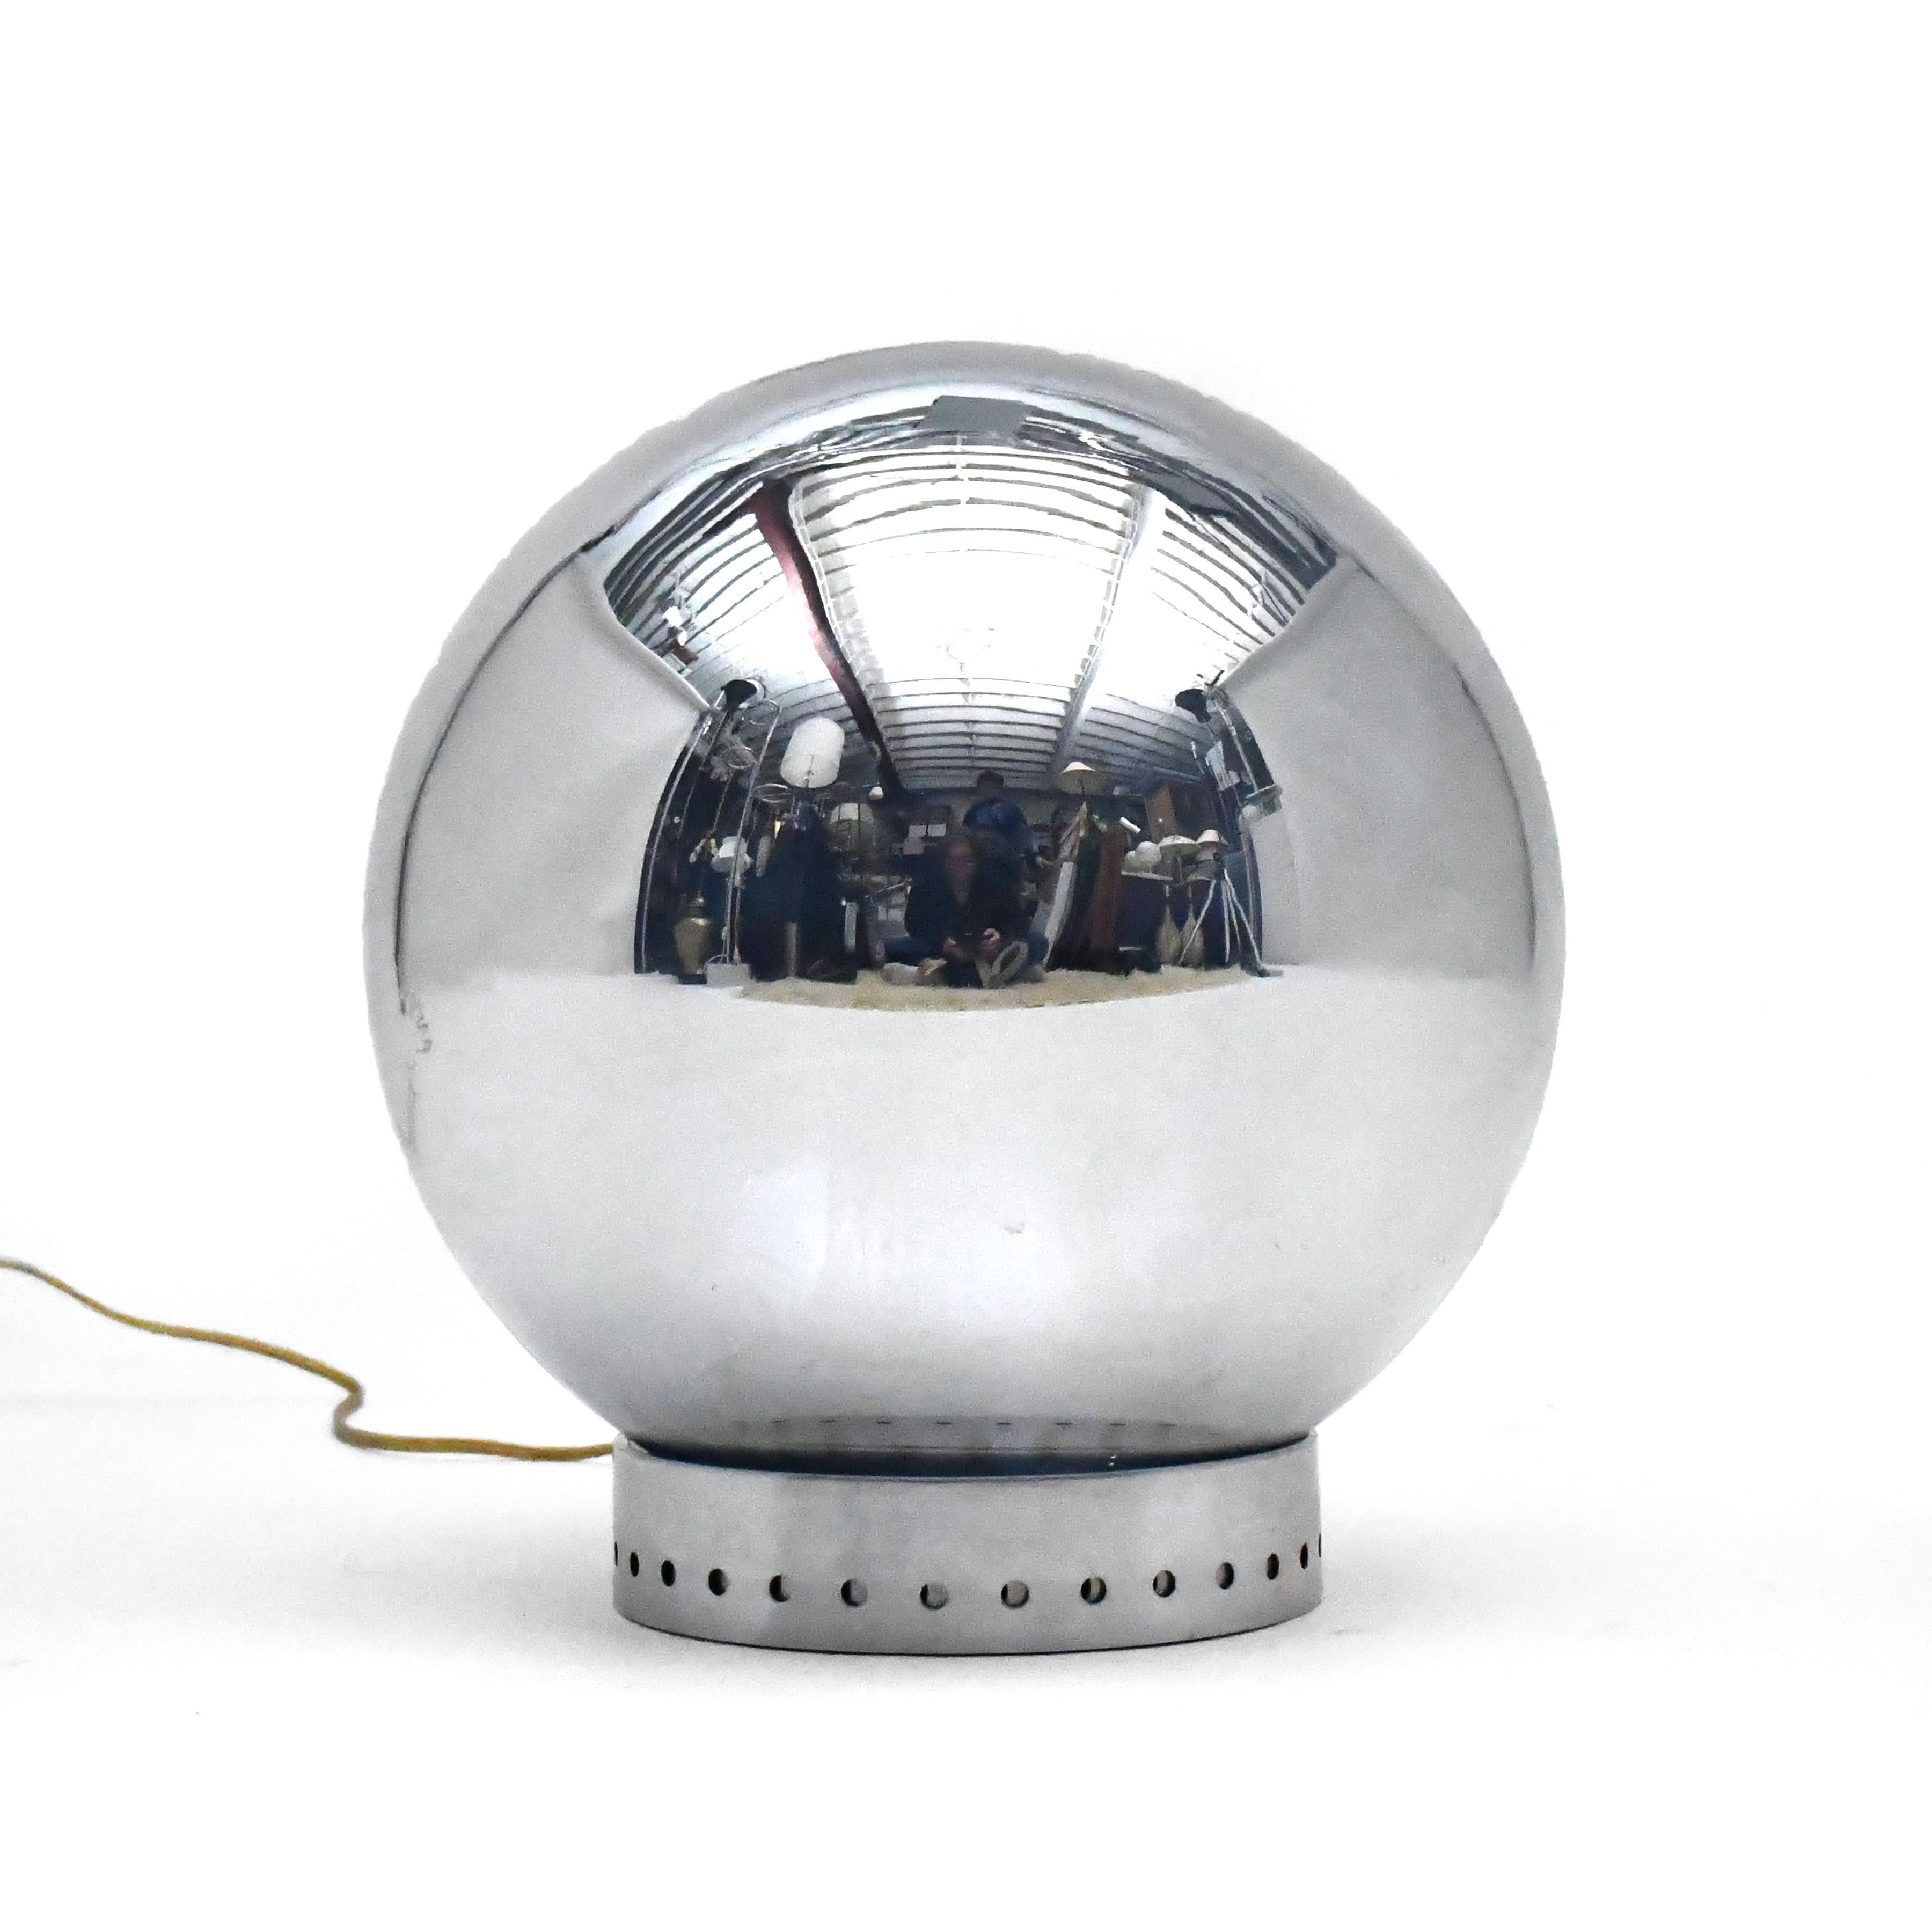 A rare and important design by famous lighting designer Robert Sonneman, this wildly innovative table lamp uses one-way mirror and touch-lamp technology to create a striking minimalist form. The glass sphere appears to be a chrome ball when off, but